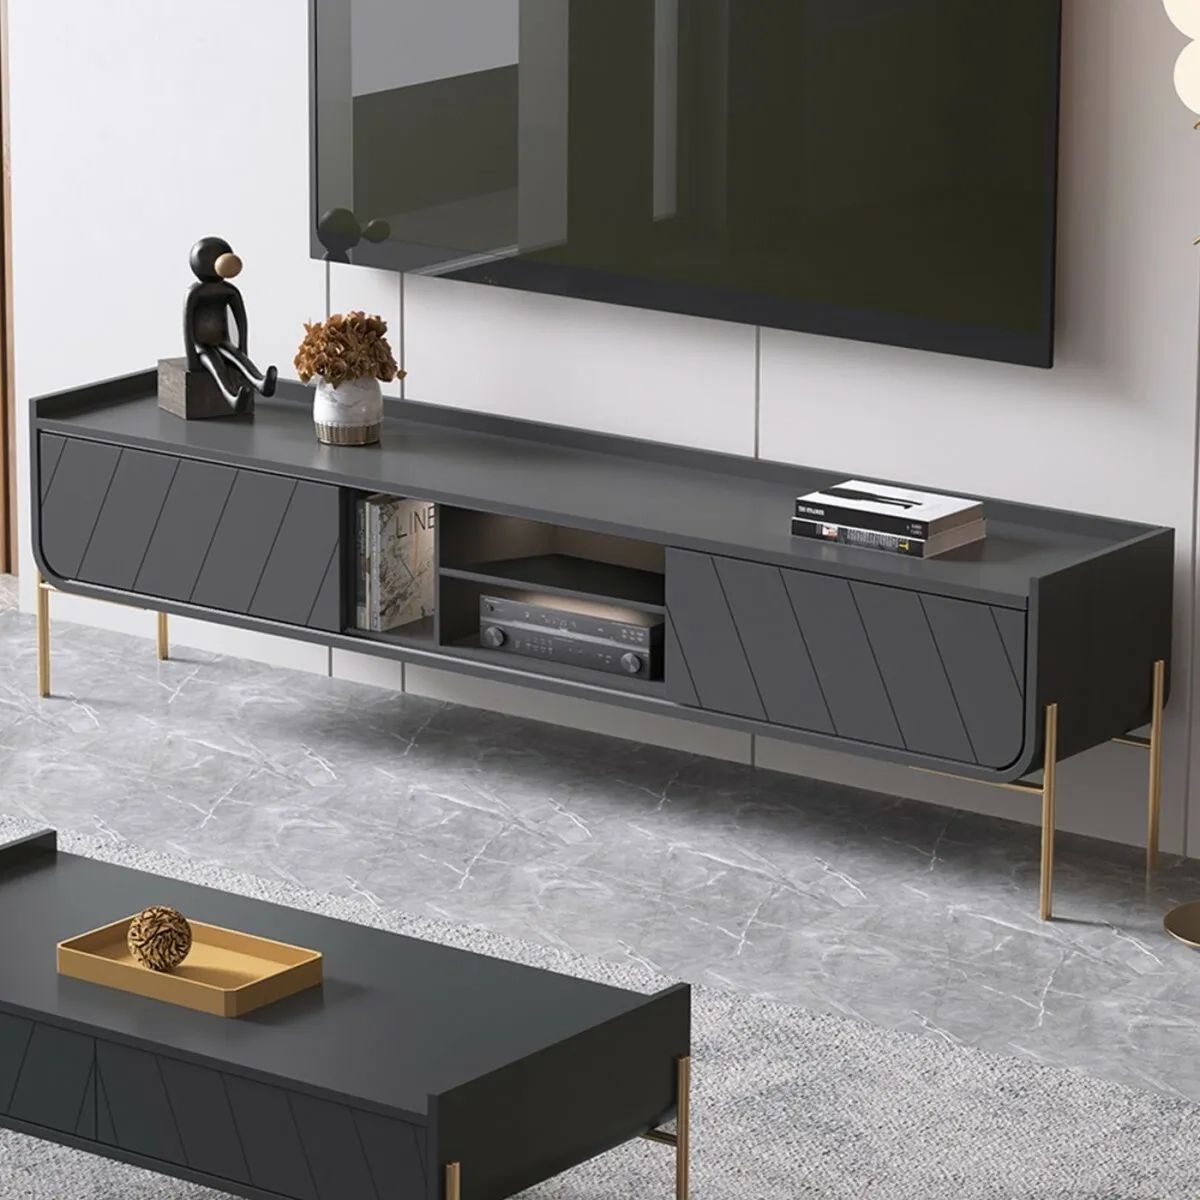 Large Grey Tv Unit Sliding Doors Storage Shelves Gold Legs Modern Stand  Cabinet | Ebay Pertaining To Modern Stands With Shelves (View 14 of 15)